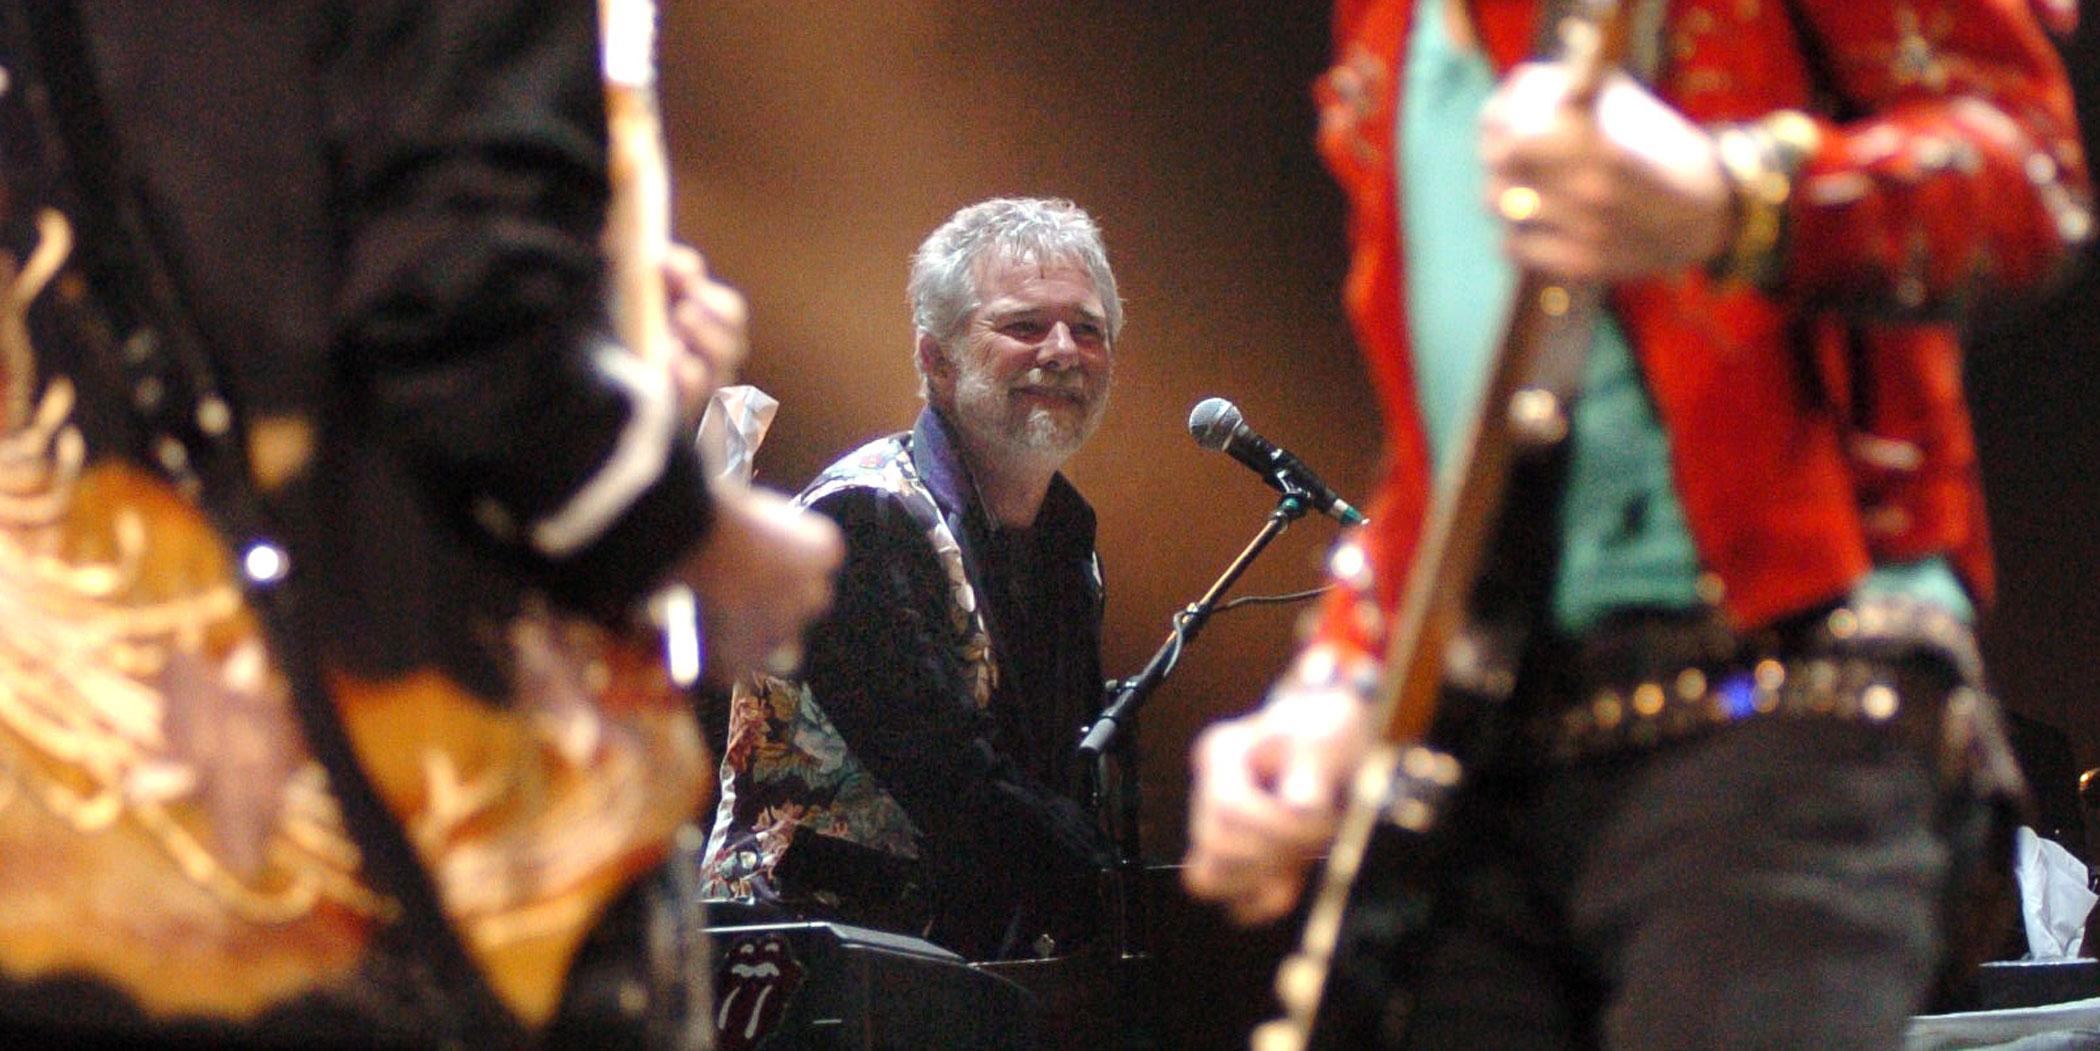 Courtesy Chuck Leavell/file